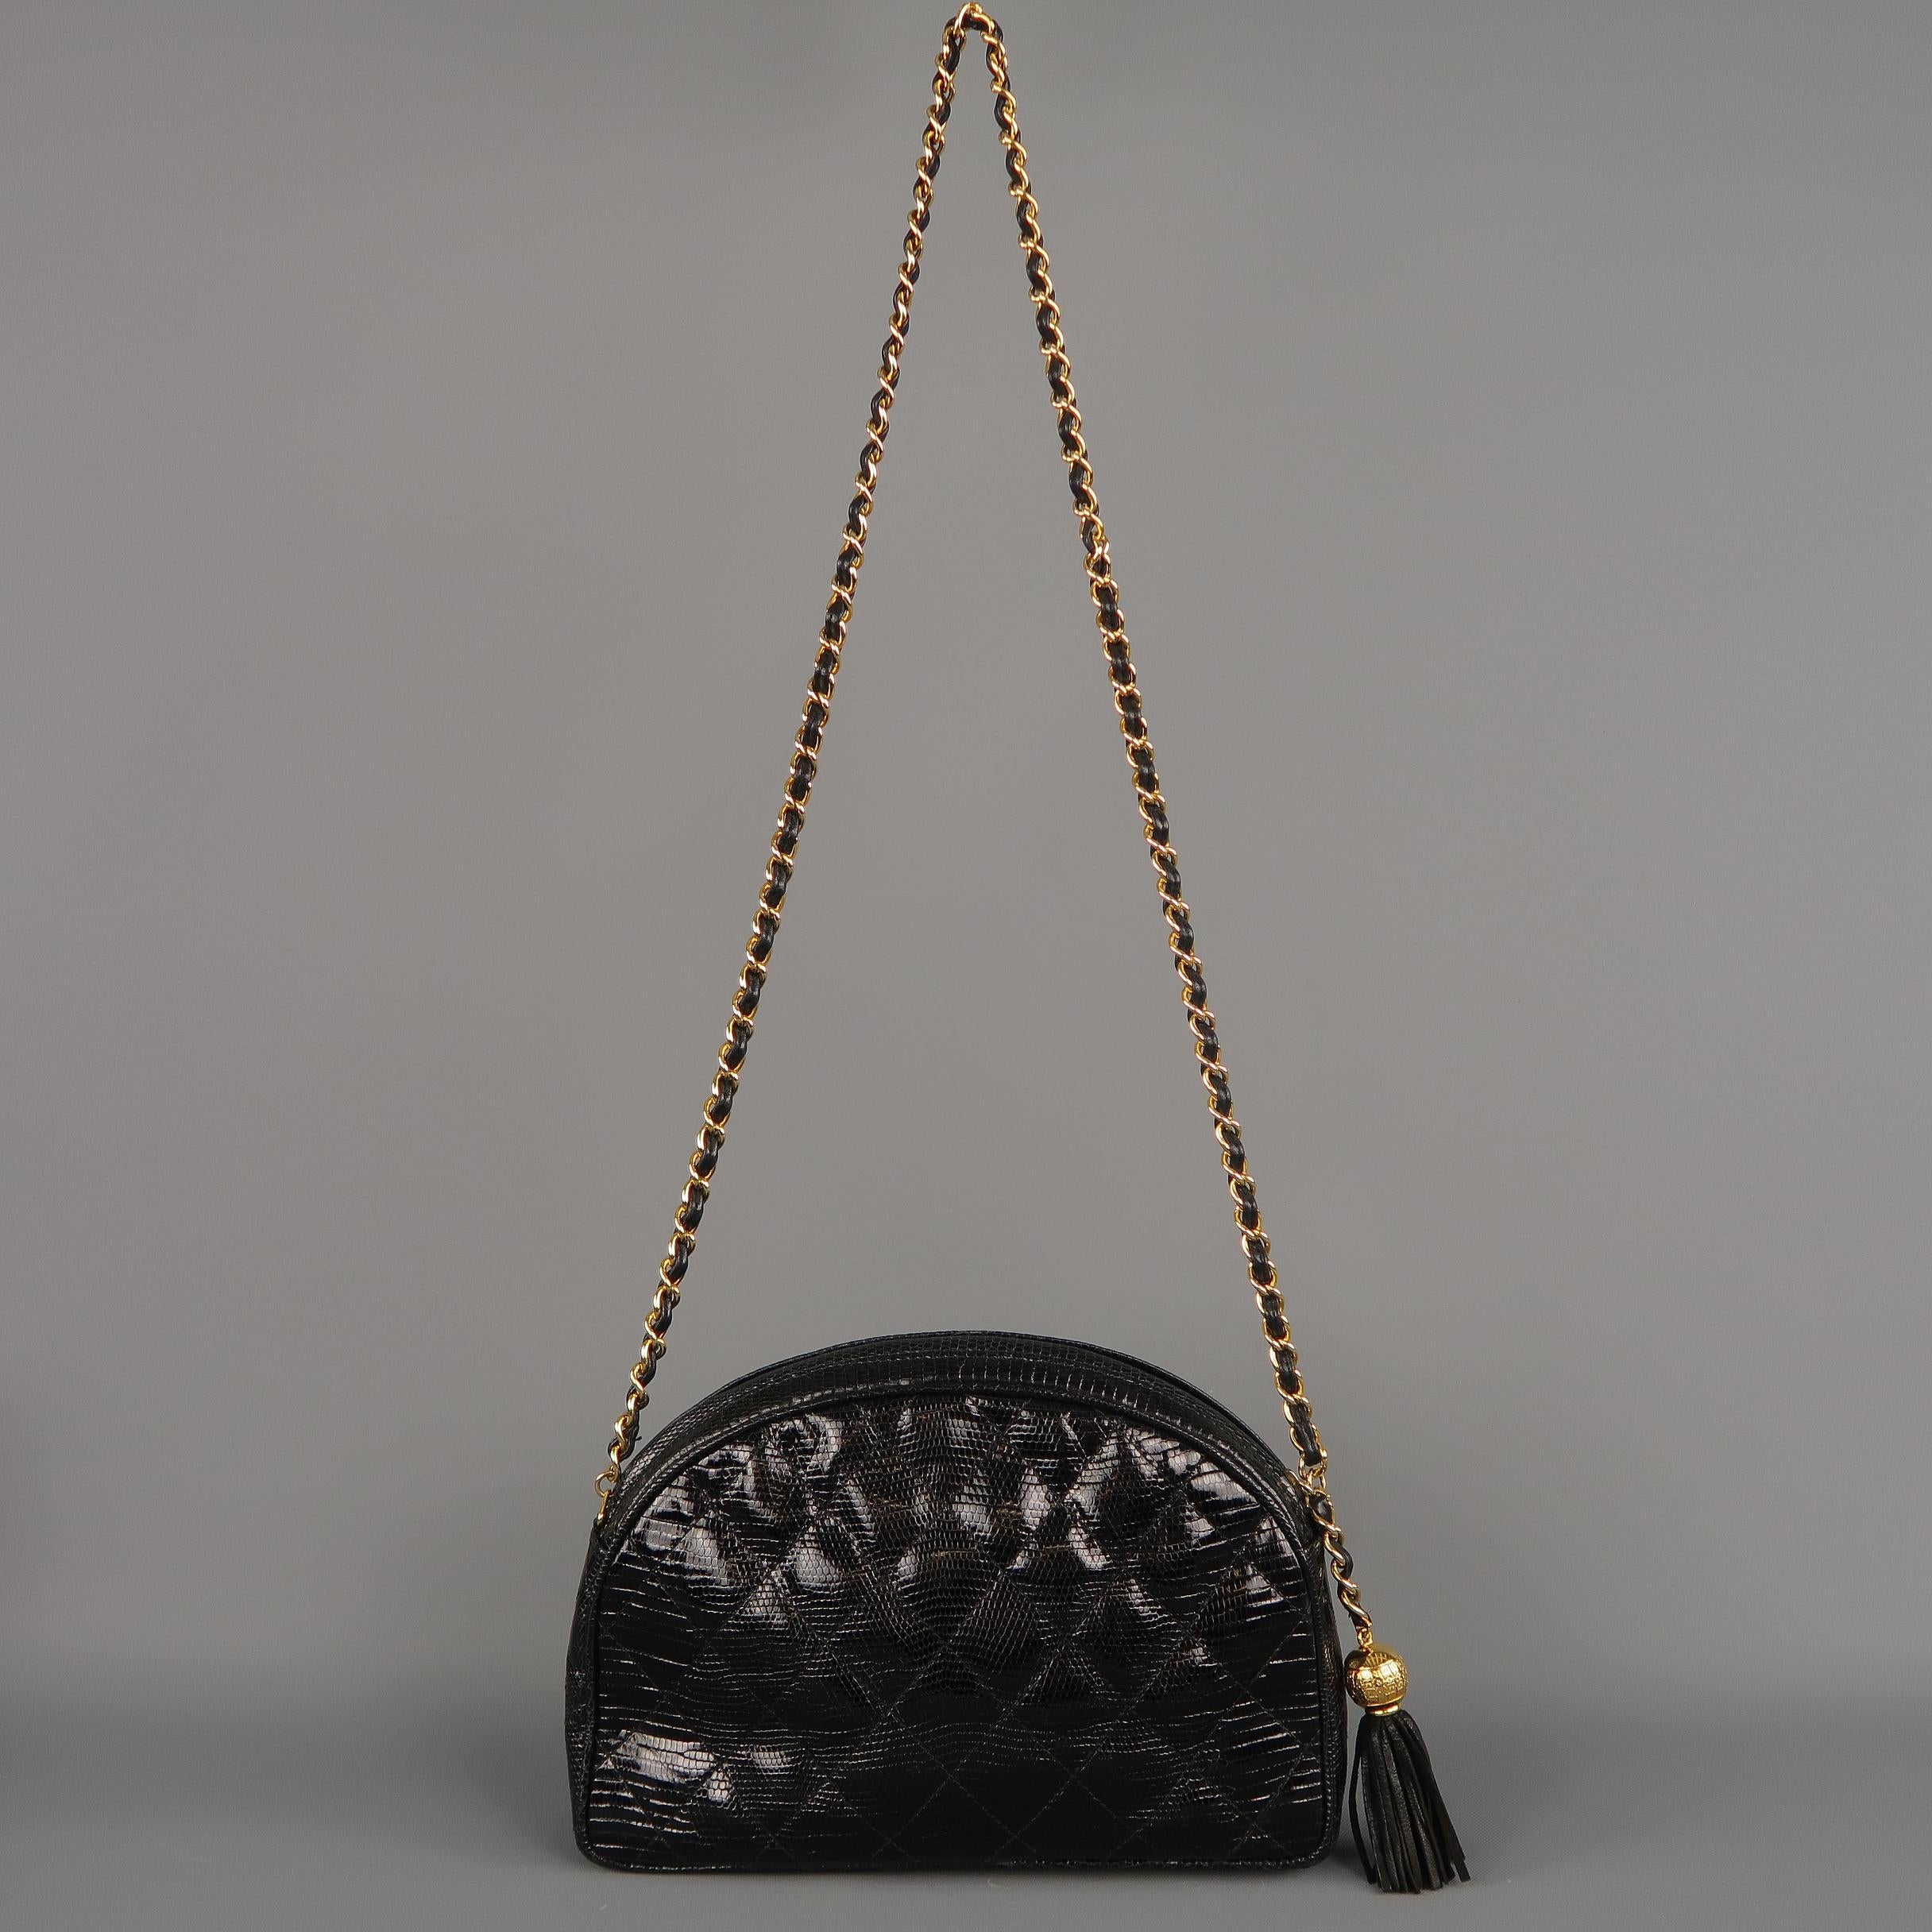 Vintage early 1990's CHANEL bag comes in quilted lizard skin with a half moon pouch shape, yellow gold tone metal, leather woven chain strap, top zip with gold tone CC emblem tassel pull, and leather interior.  Made in Italy.

Excellent Pre-Owned